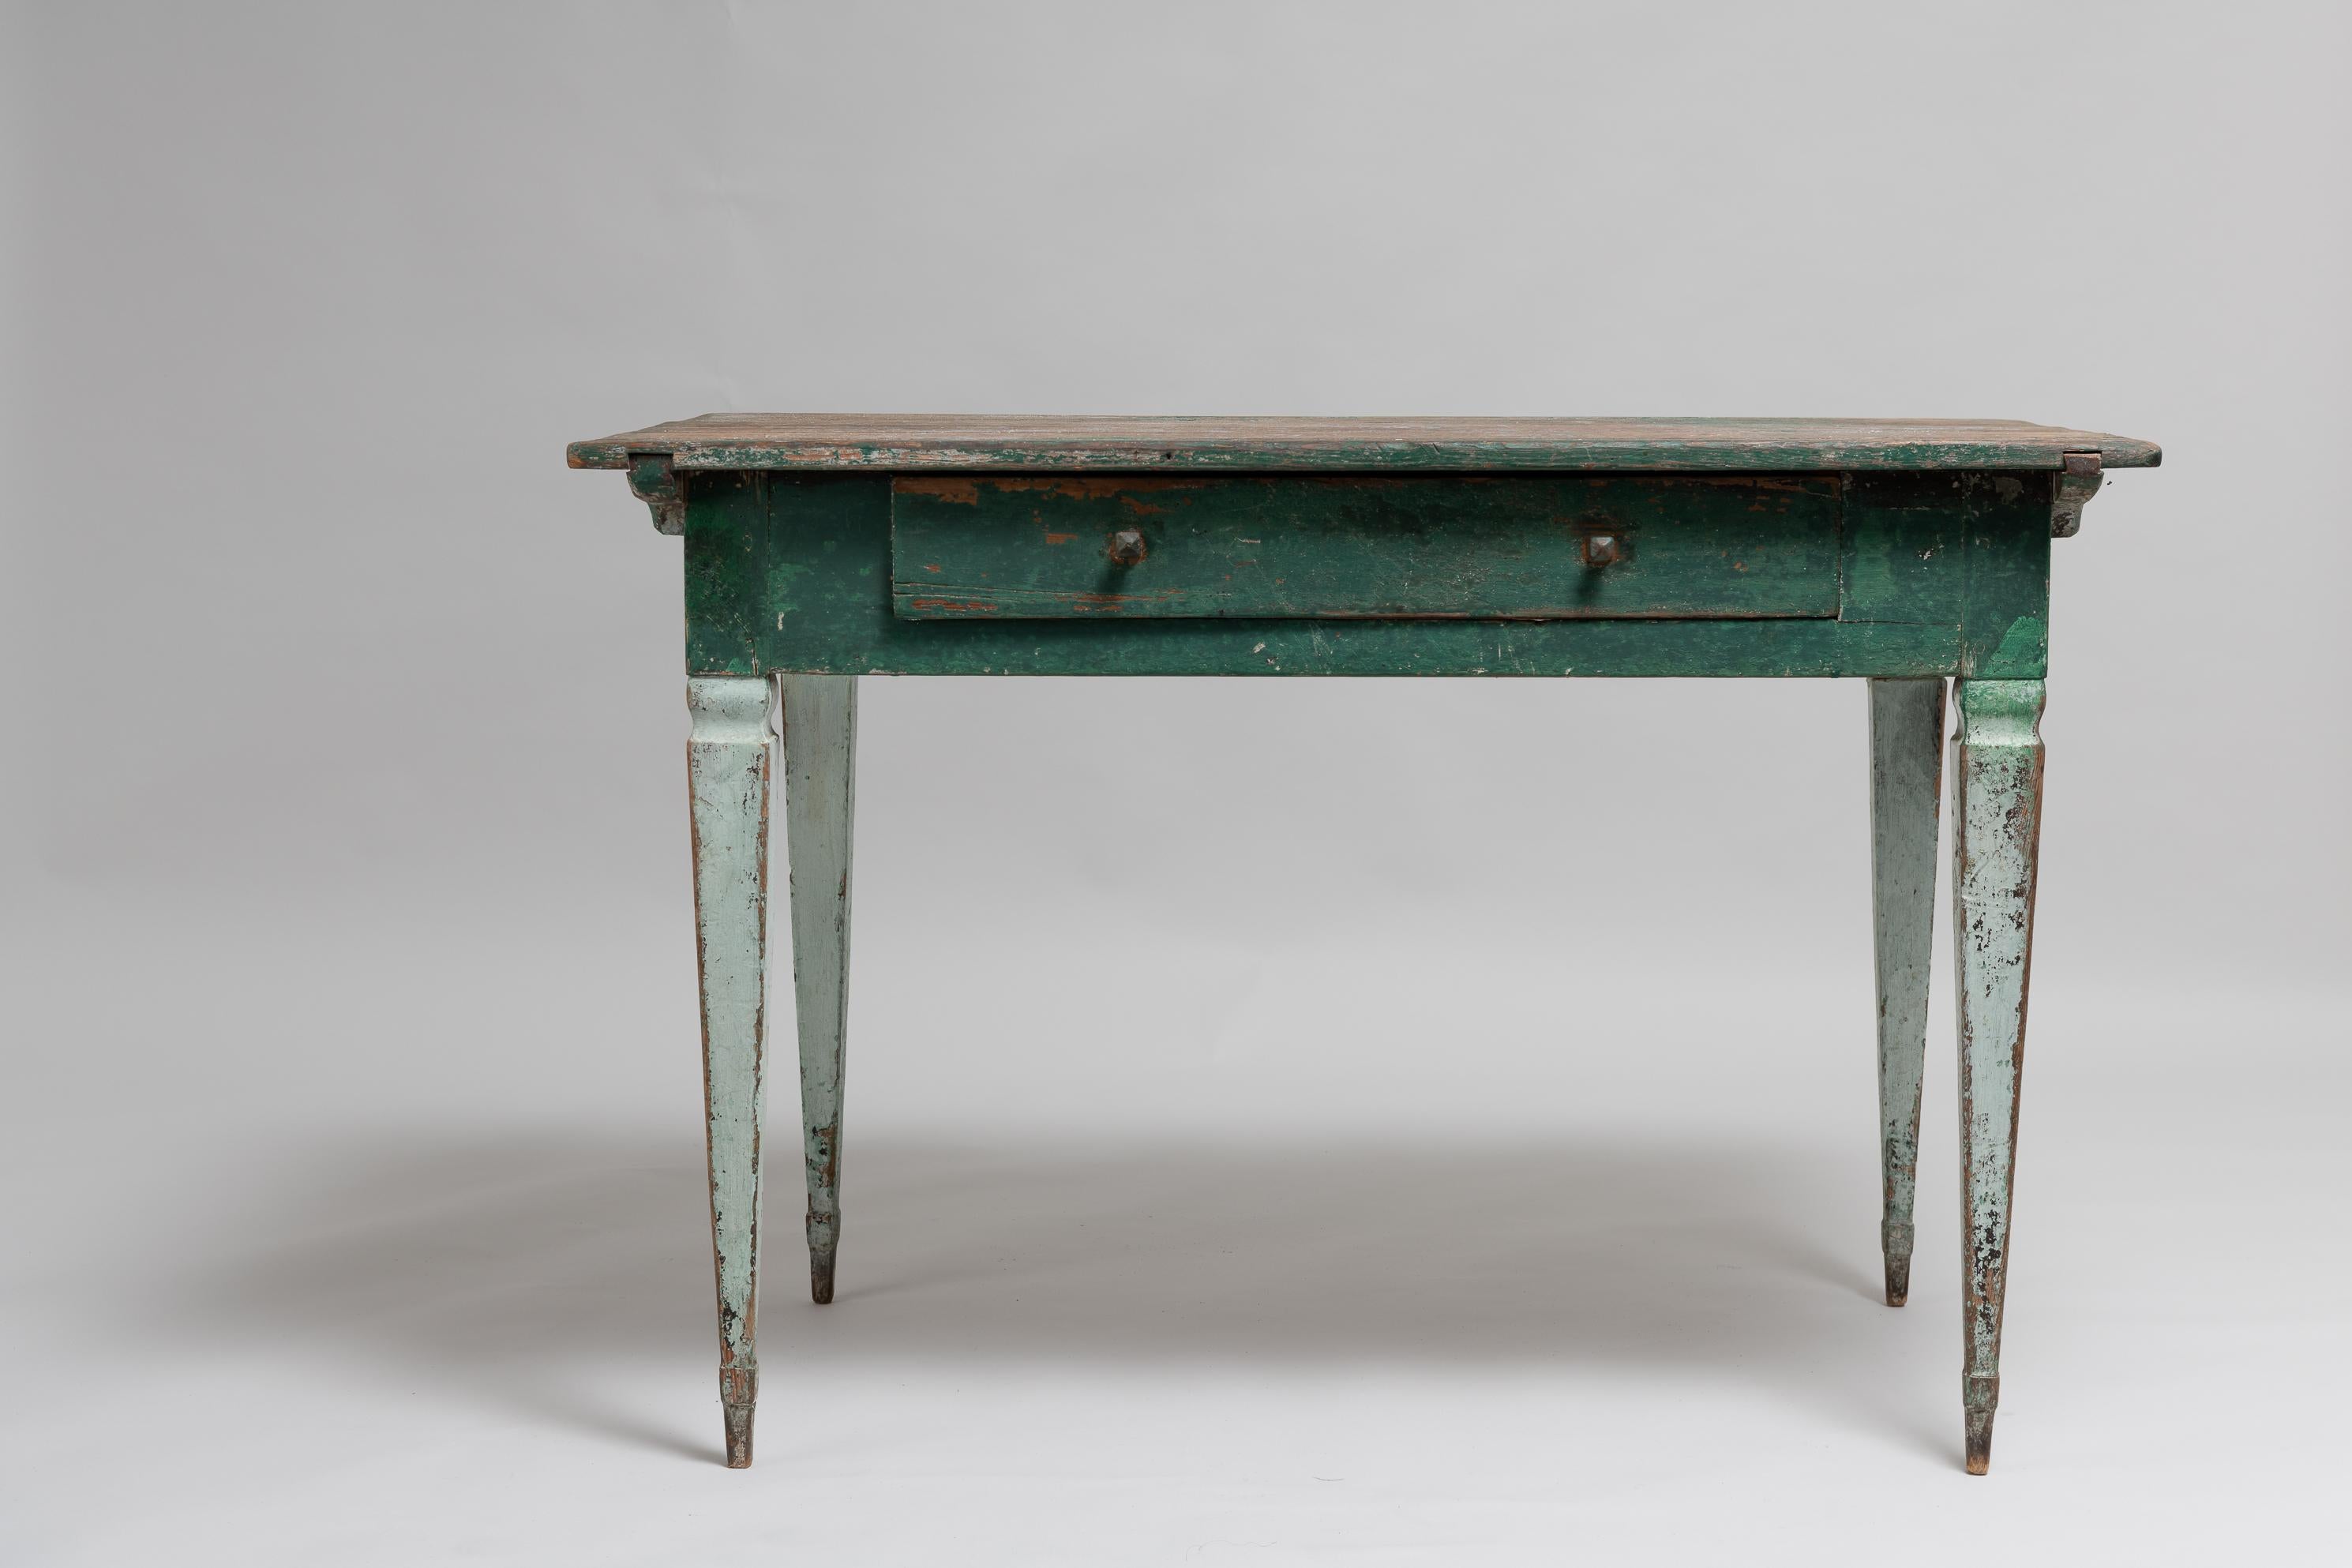 18th century green gustavian desk in painted pine. Old historic paint from the 1800s with visible distress and patina. Hand made wooden handles to the drawer. An unusual detail is the collar around the legs down by the feet. The table is from the